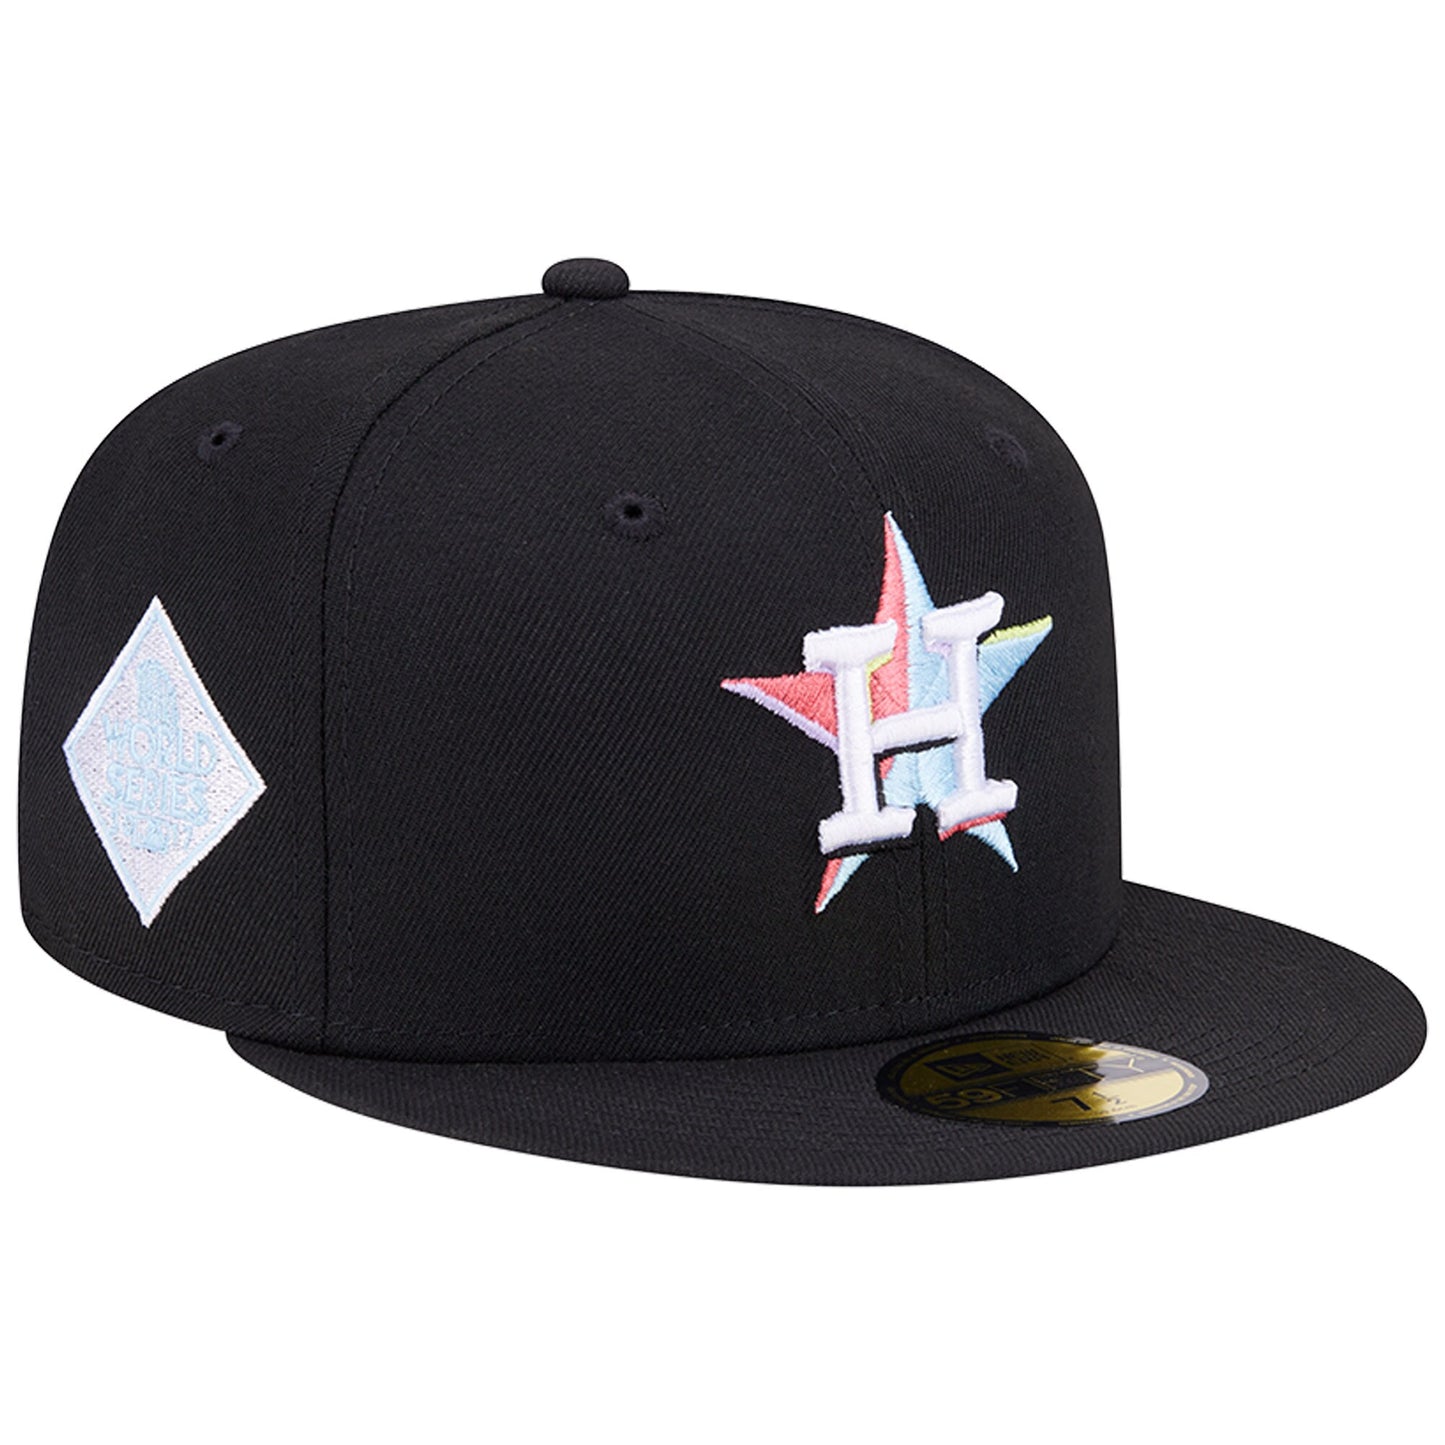 Houston Astros New Era Multi-Color Pack 59FIFTY Fitted Hat - Black